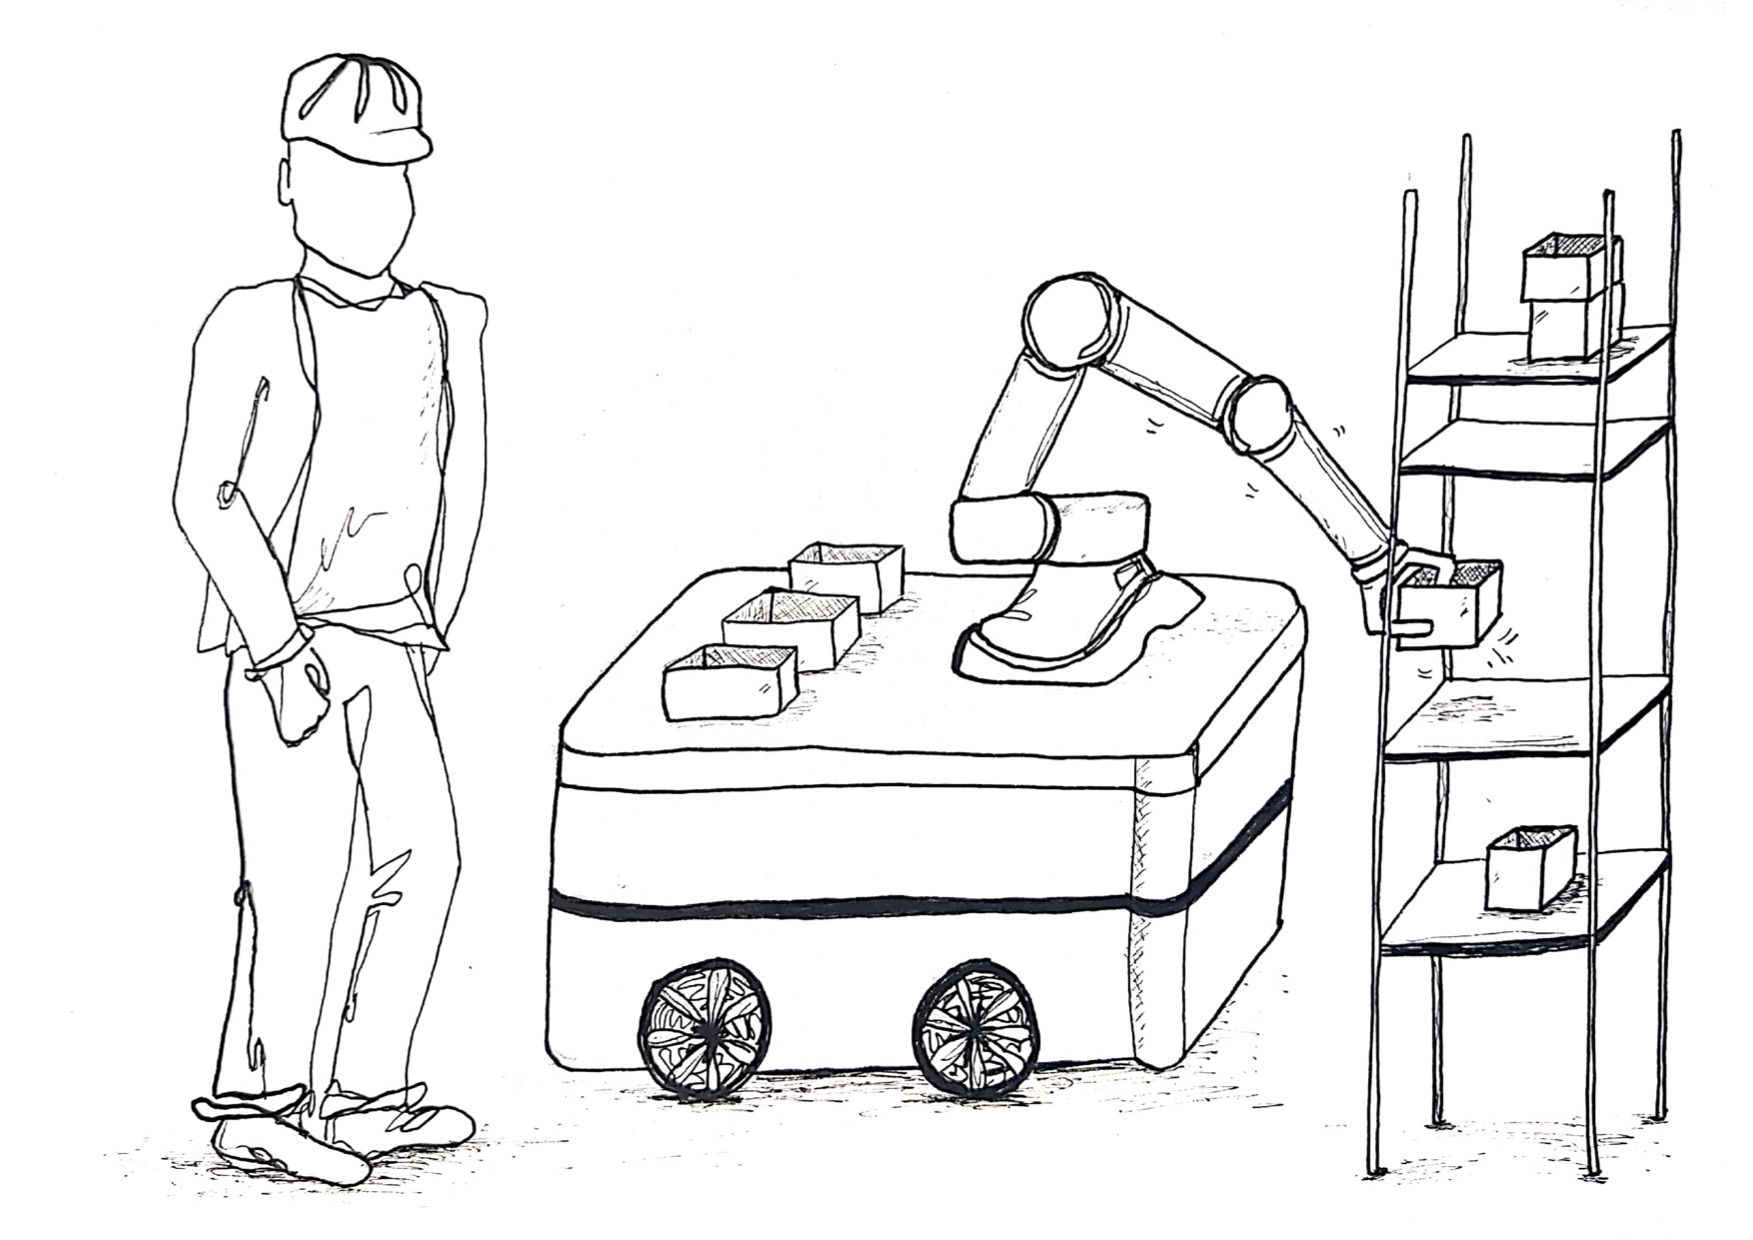 An AMR with a mounted collaborative robot picking up boxes